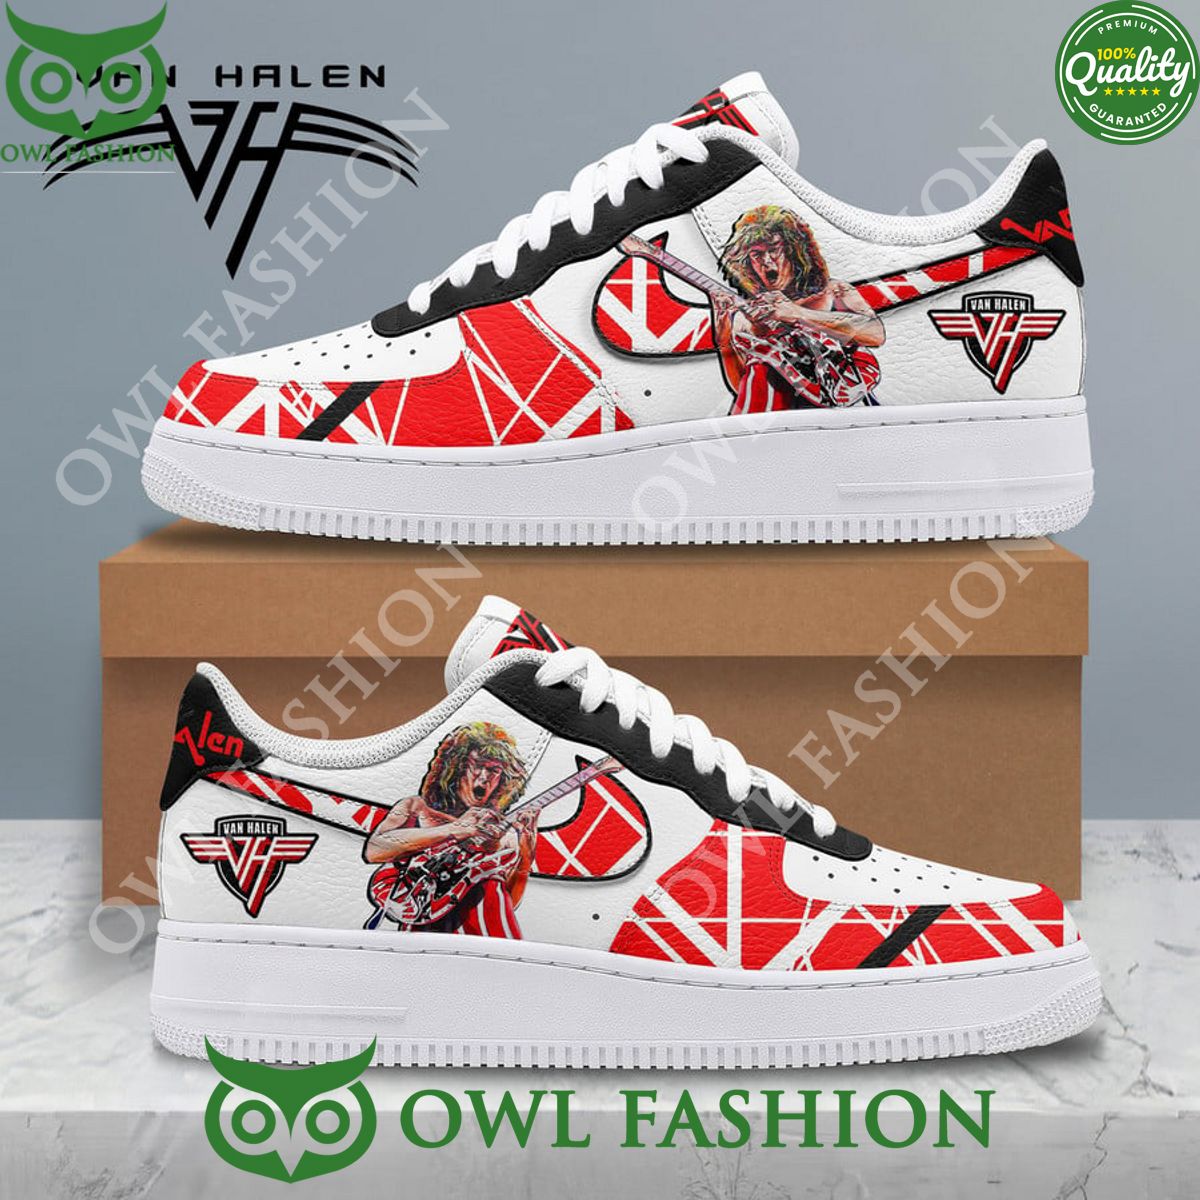 Van Halen Hard rock band Premium Air Force 1 Shoes You are always amazing